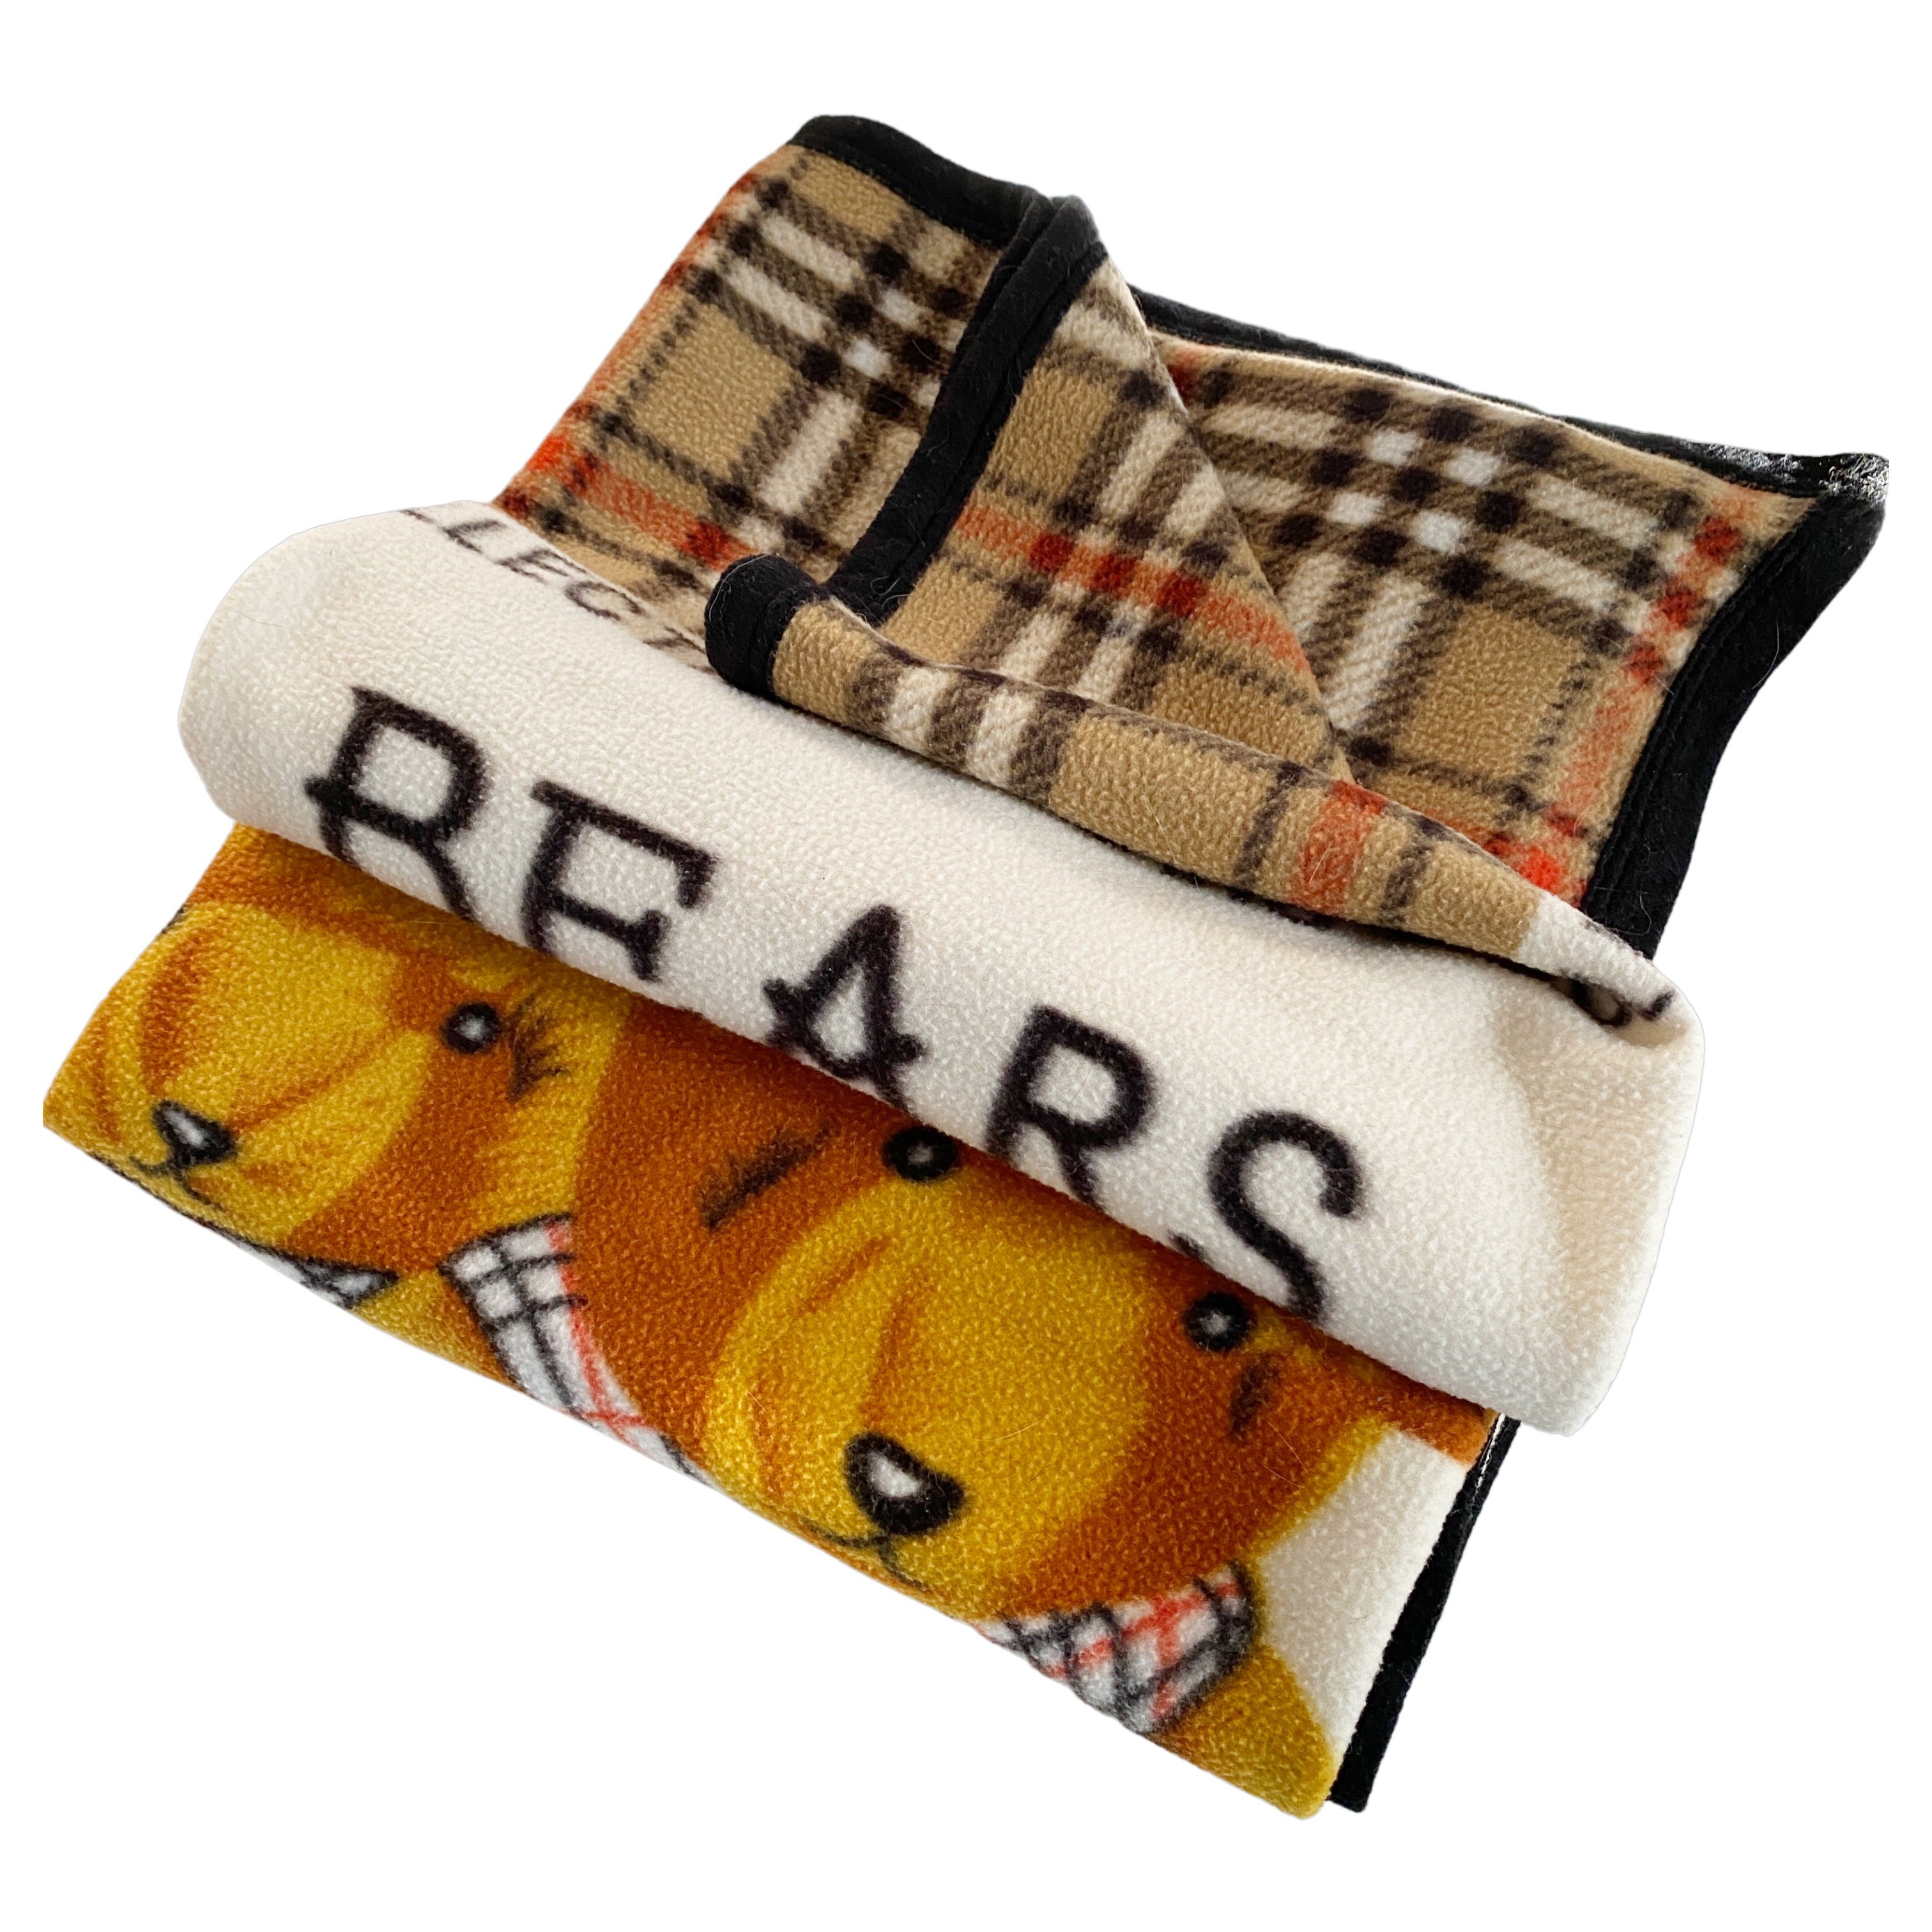 BEARS COLLECTION BLANKET